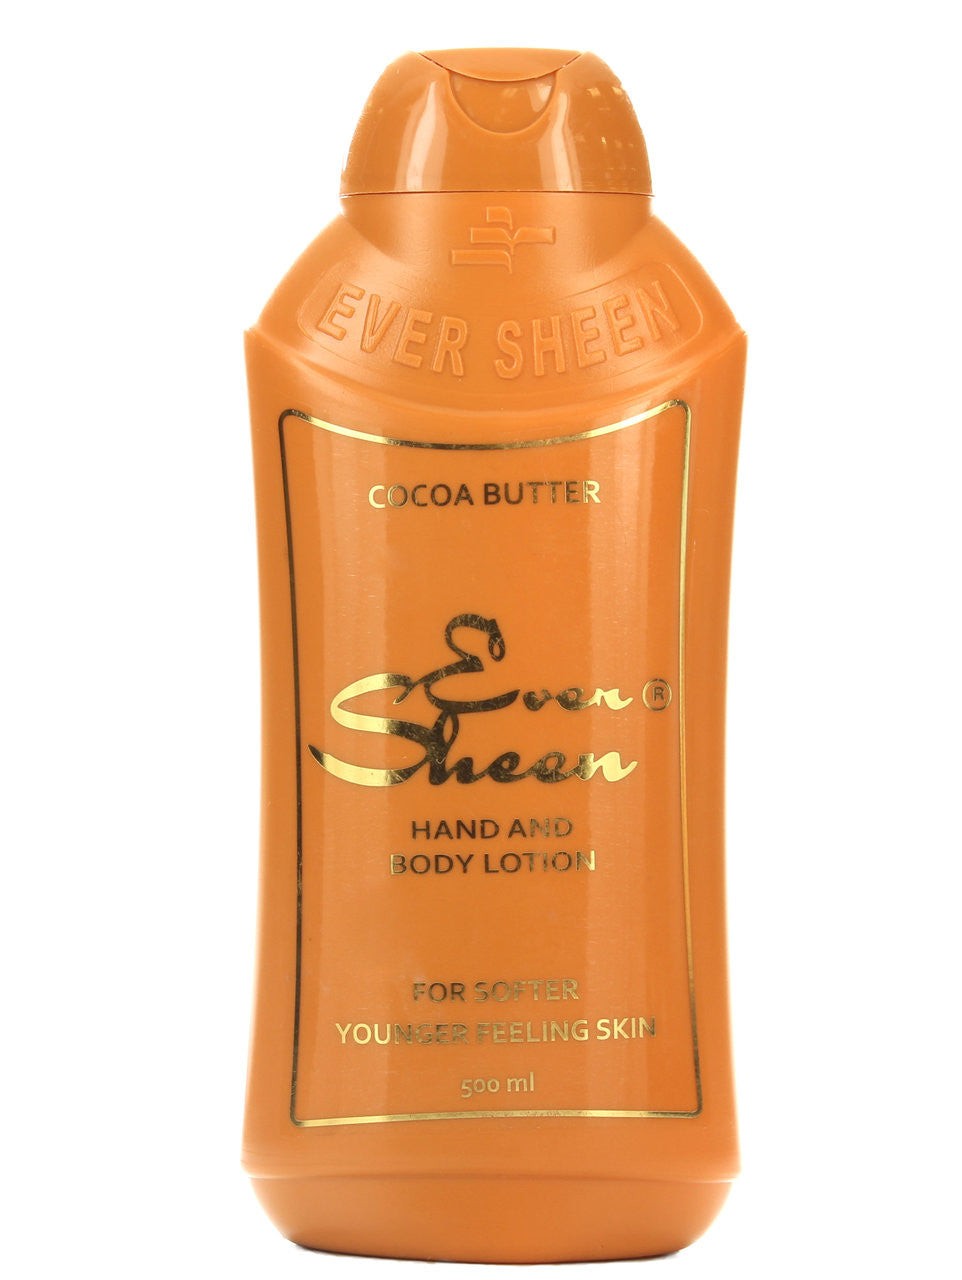 Ever Sheen Cocoa Butter Lotion 169 Oz 500ml Kismet Beauty Brands